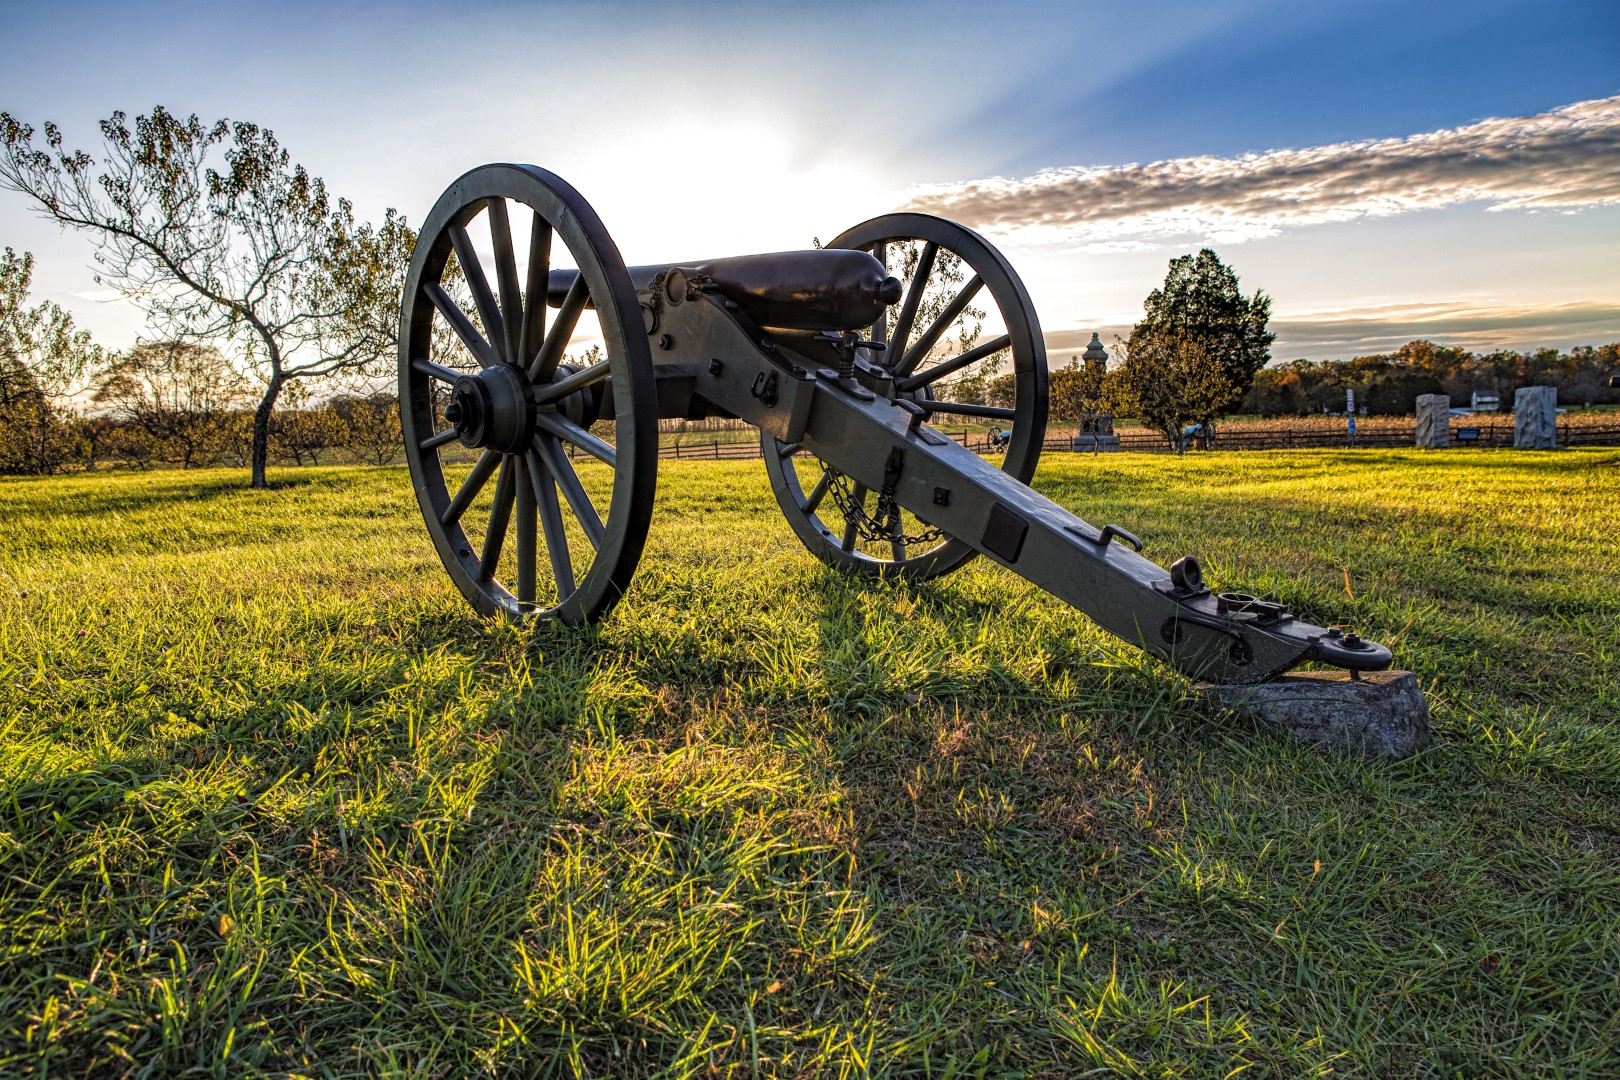 A Civil War Cannon stands guard at the Gettysburg National Battlefield in Gettysburg Pennsylvania